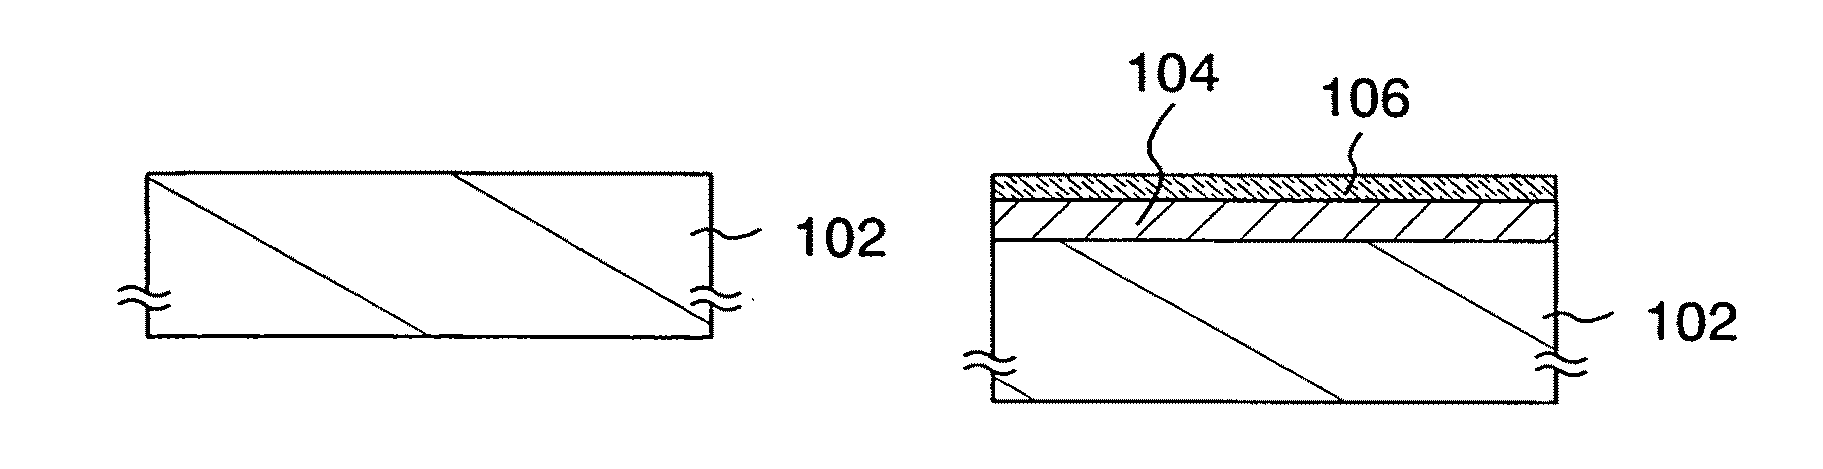 Semiconductor substrate and method for manufacturing the same